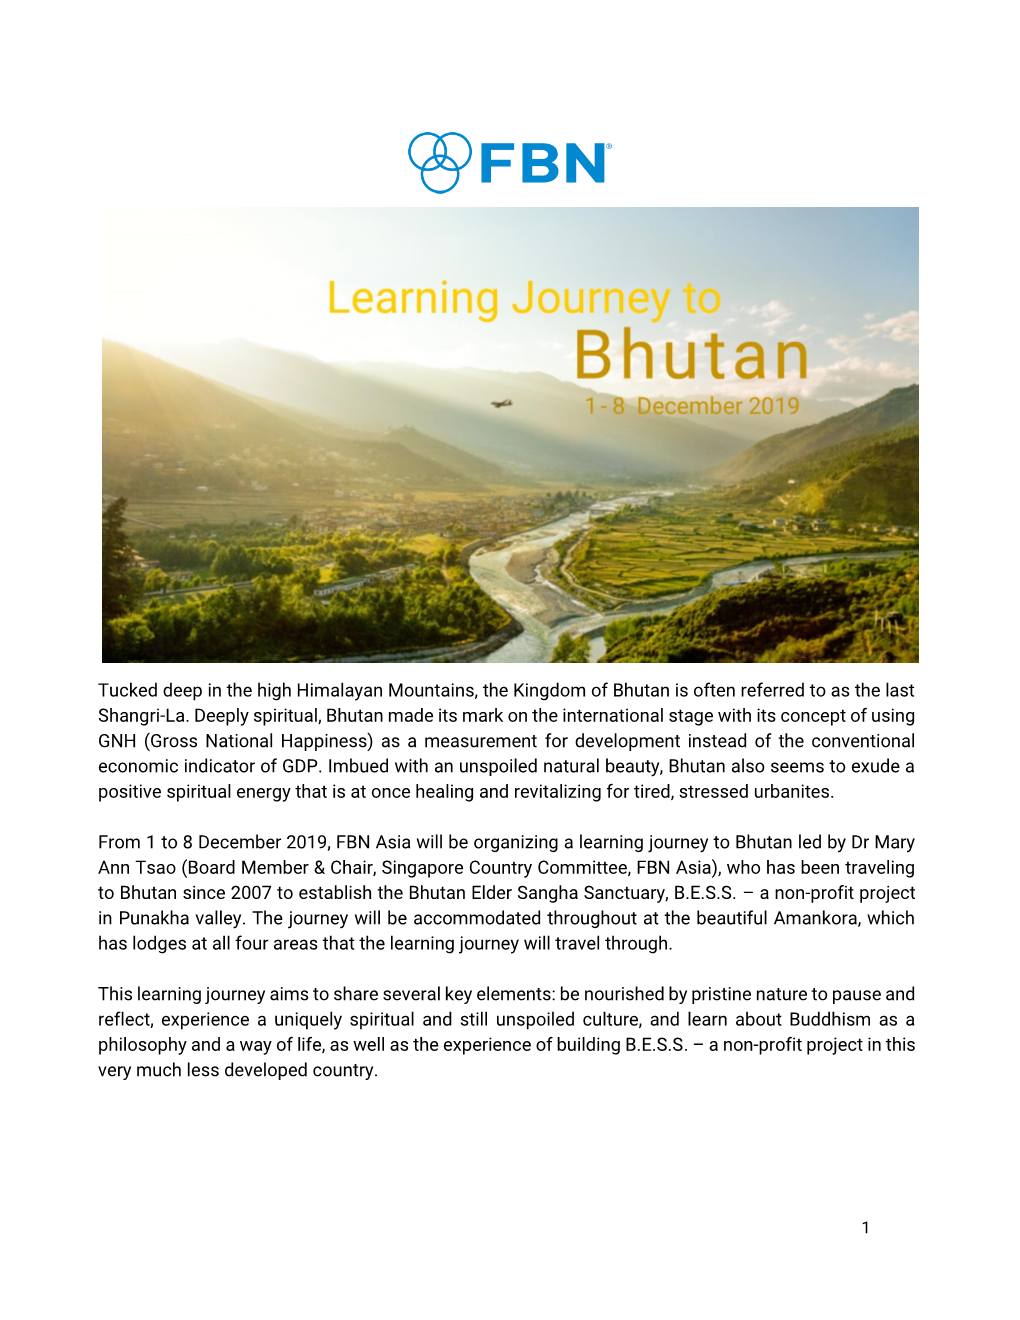 Tucked Deep in the High Himalayan Mountains, the Kingdom of Bhutan Is Often Referred to As the Last Shangri-La